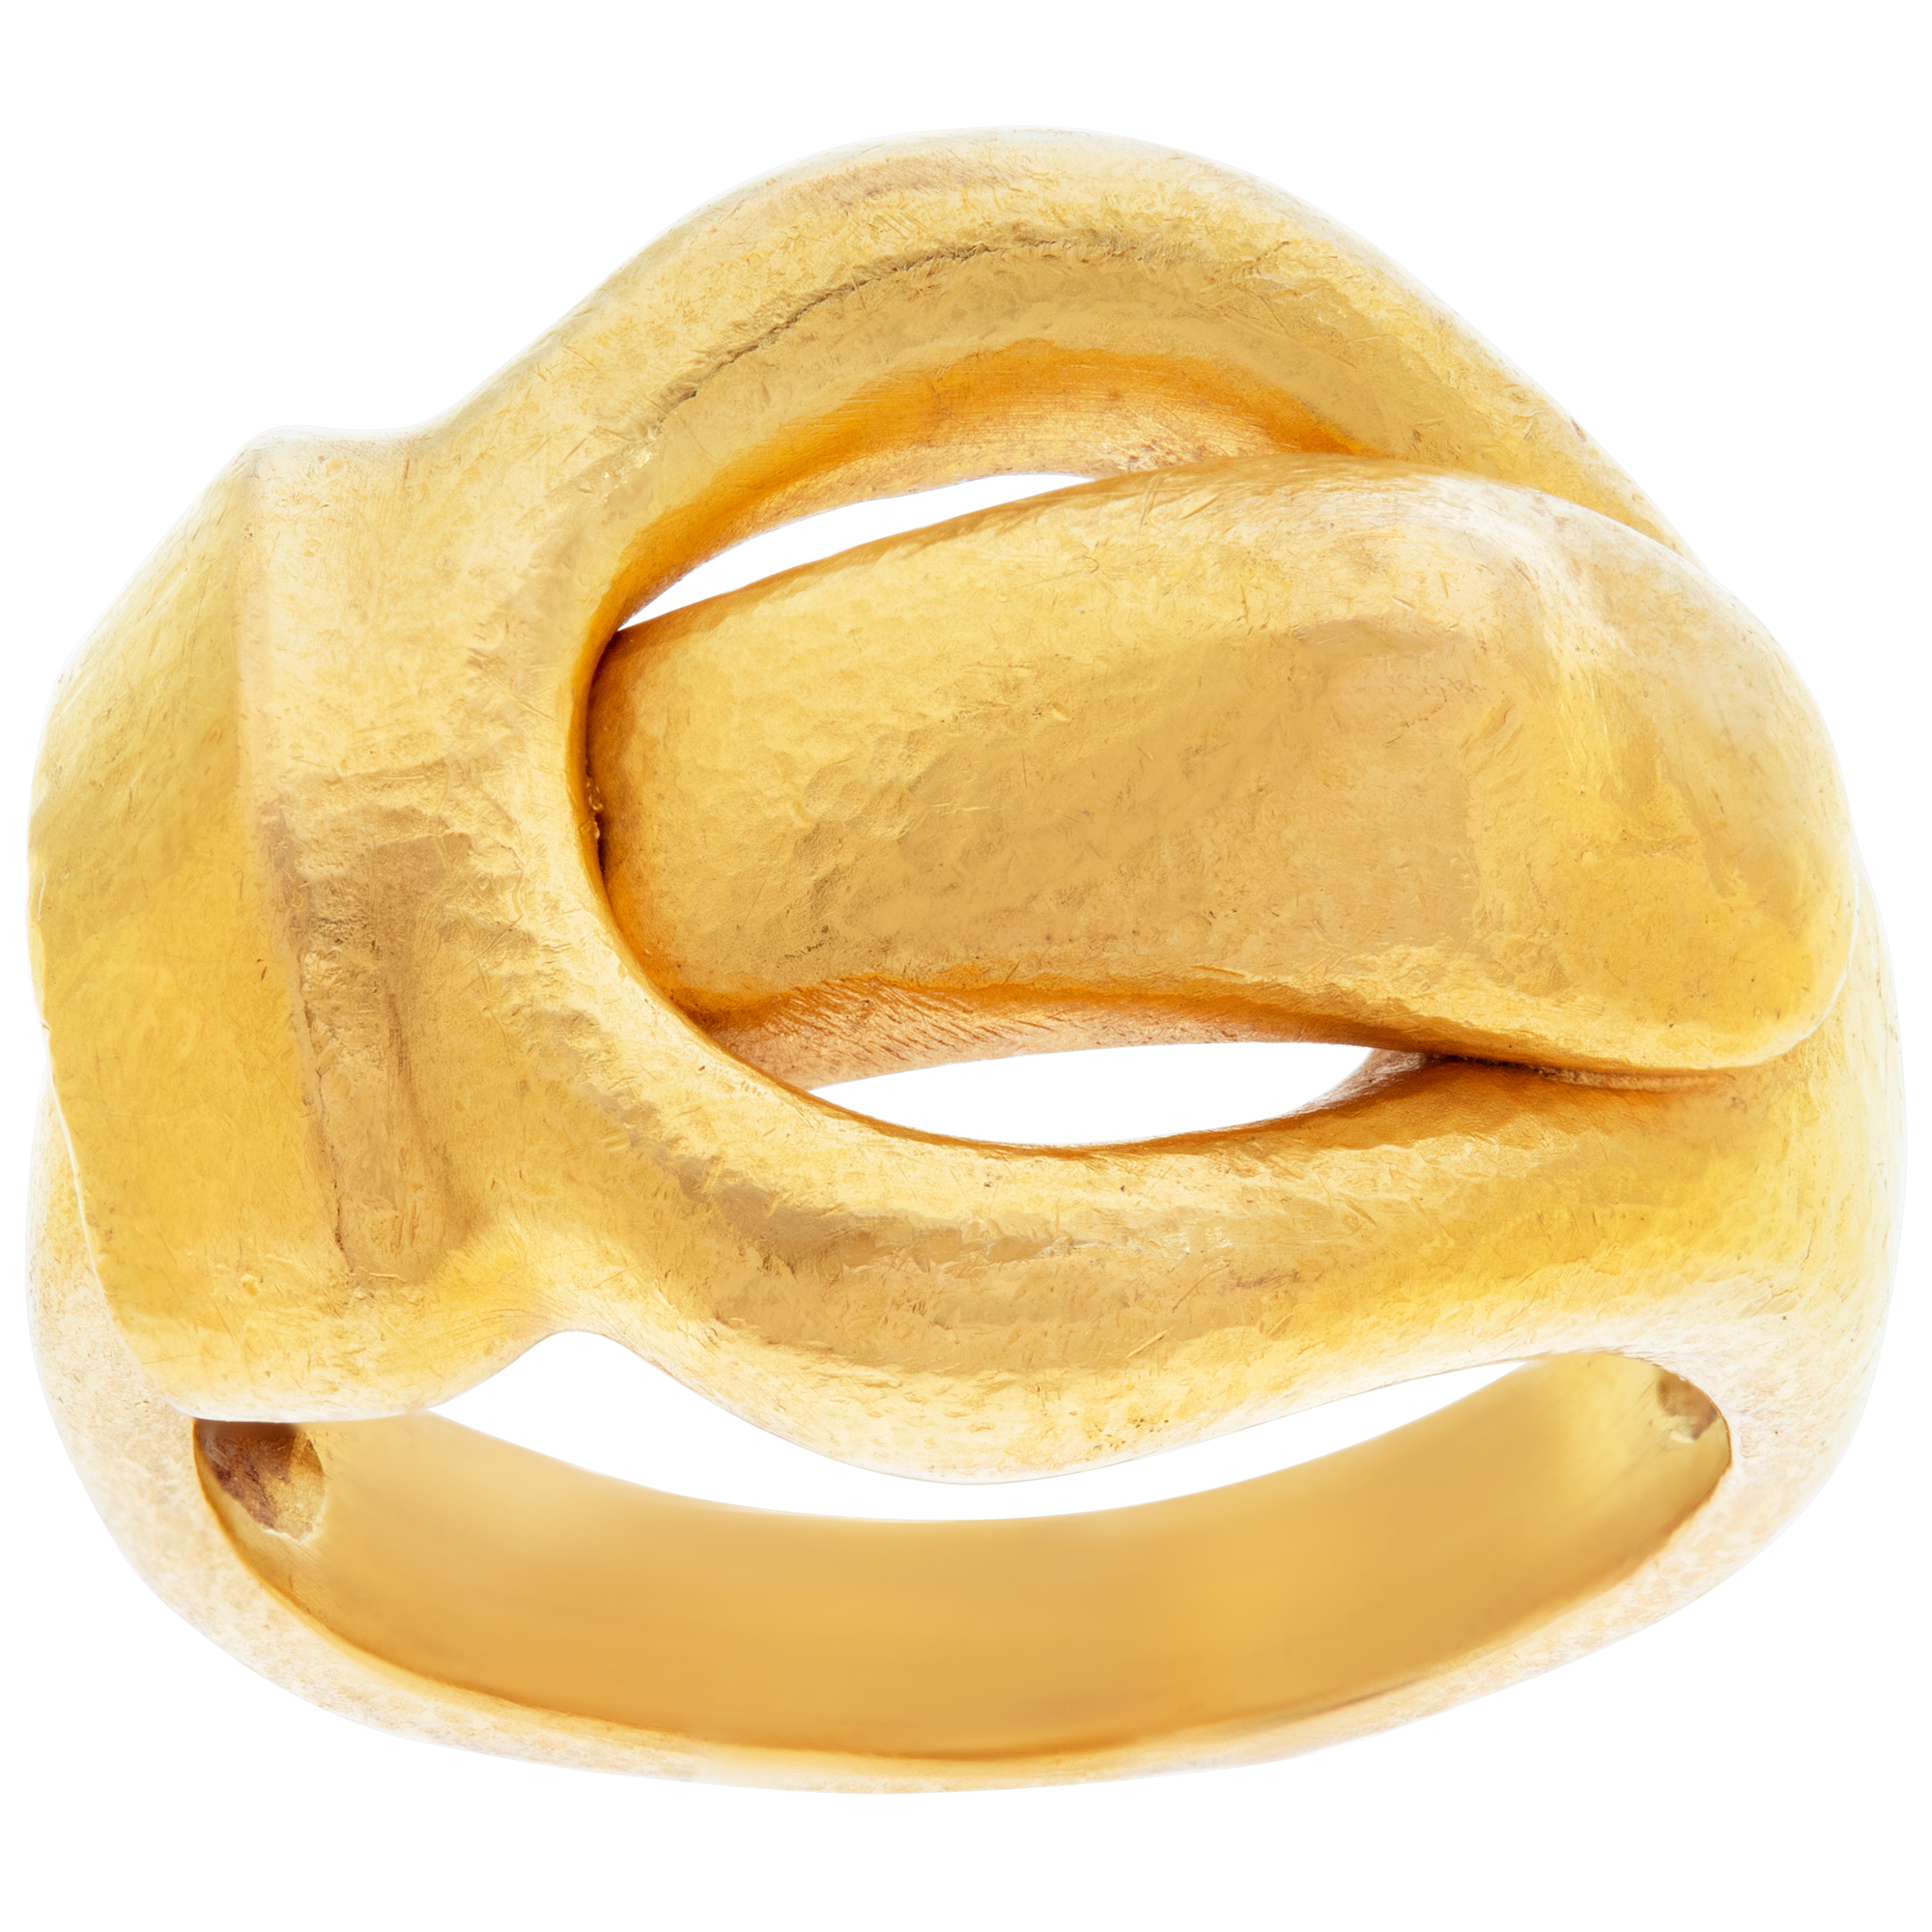  Vintage, Ilias Lalaouinis, Hand Hammered 18k ring image 1